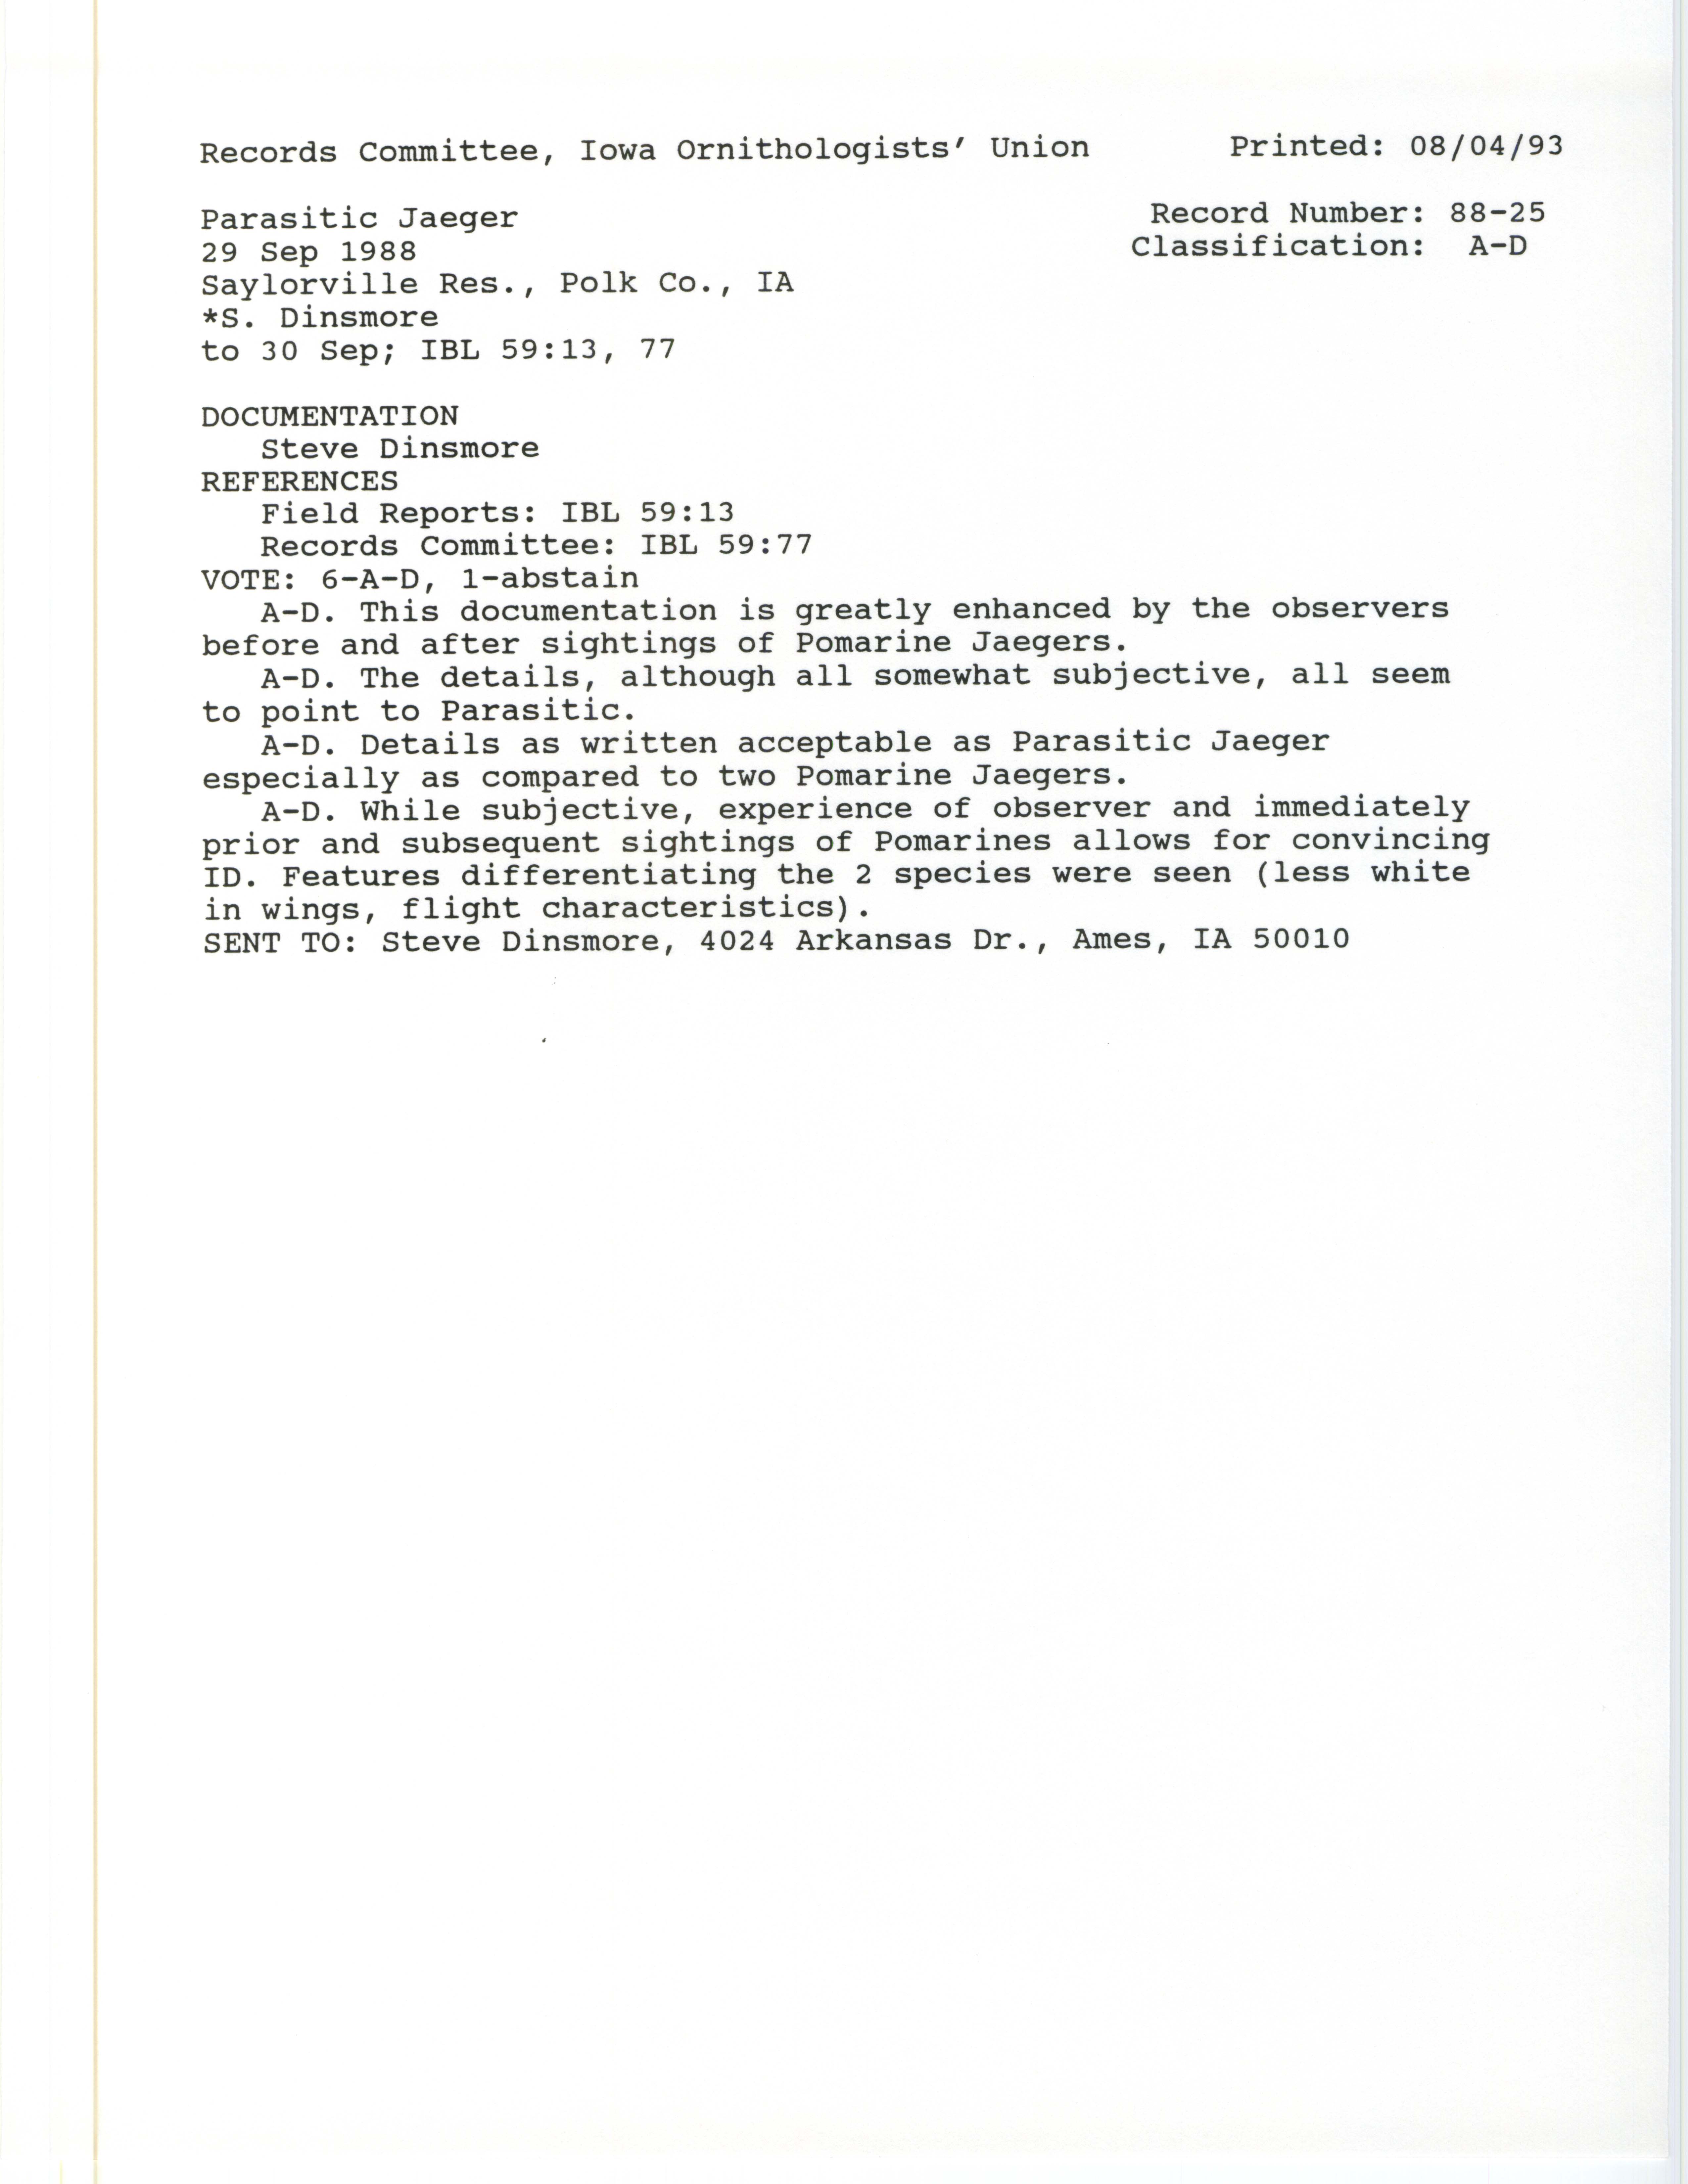 Records Committee review for rare bird sighting of Parasitic Jaeger at Saylorville Reservoir, 1988